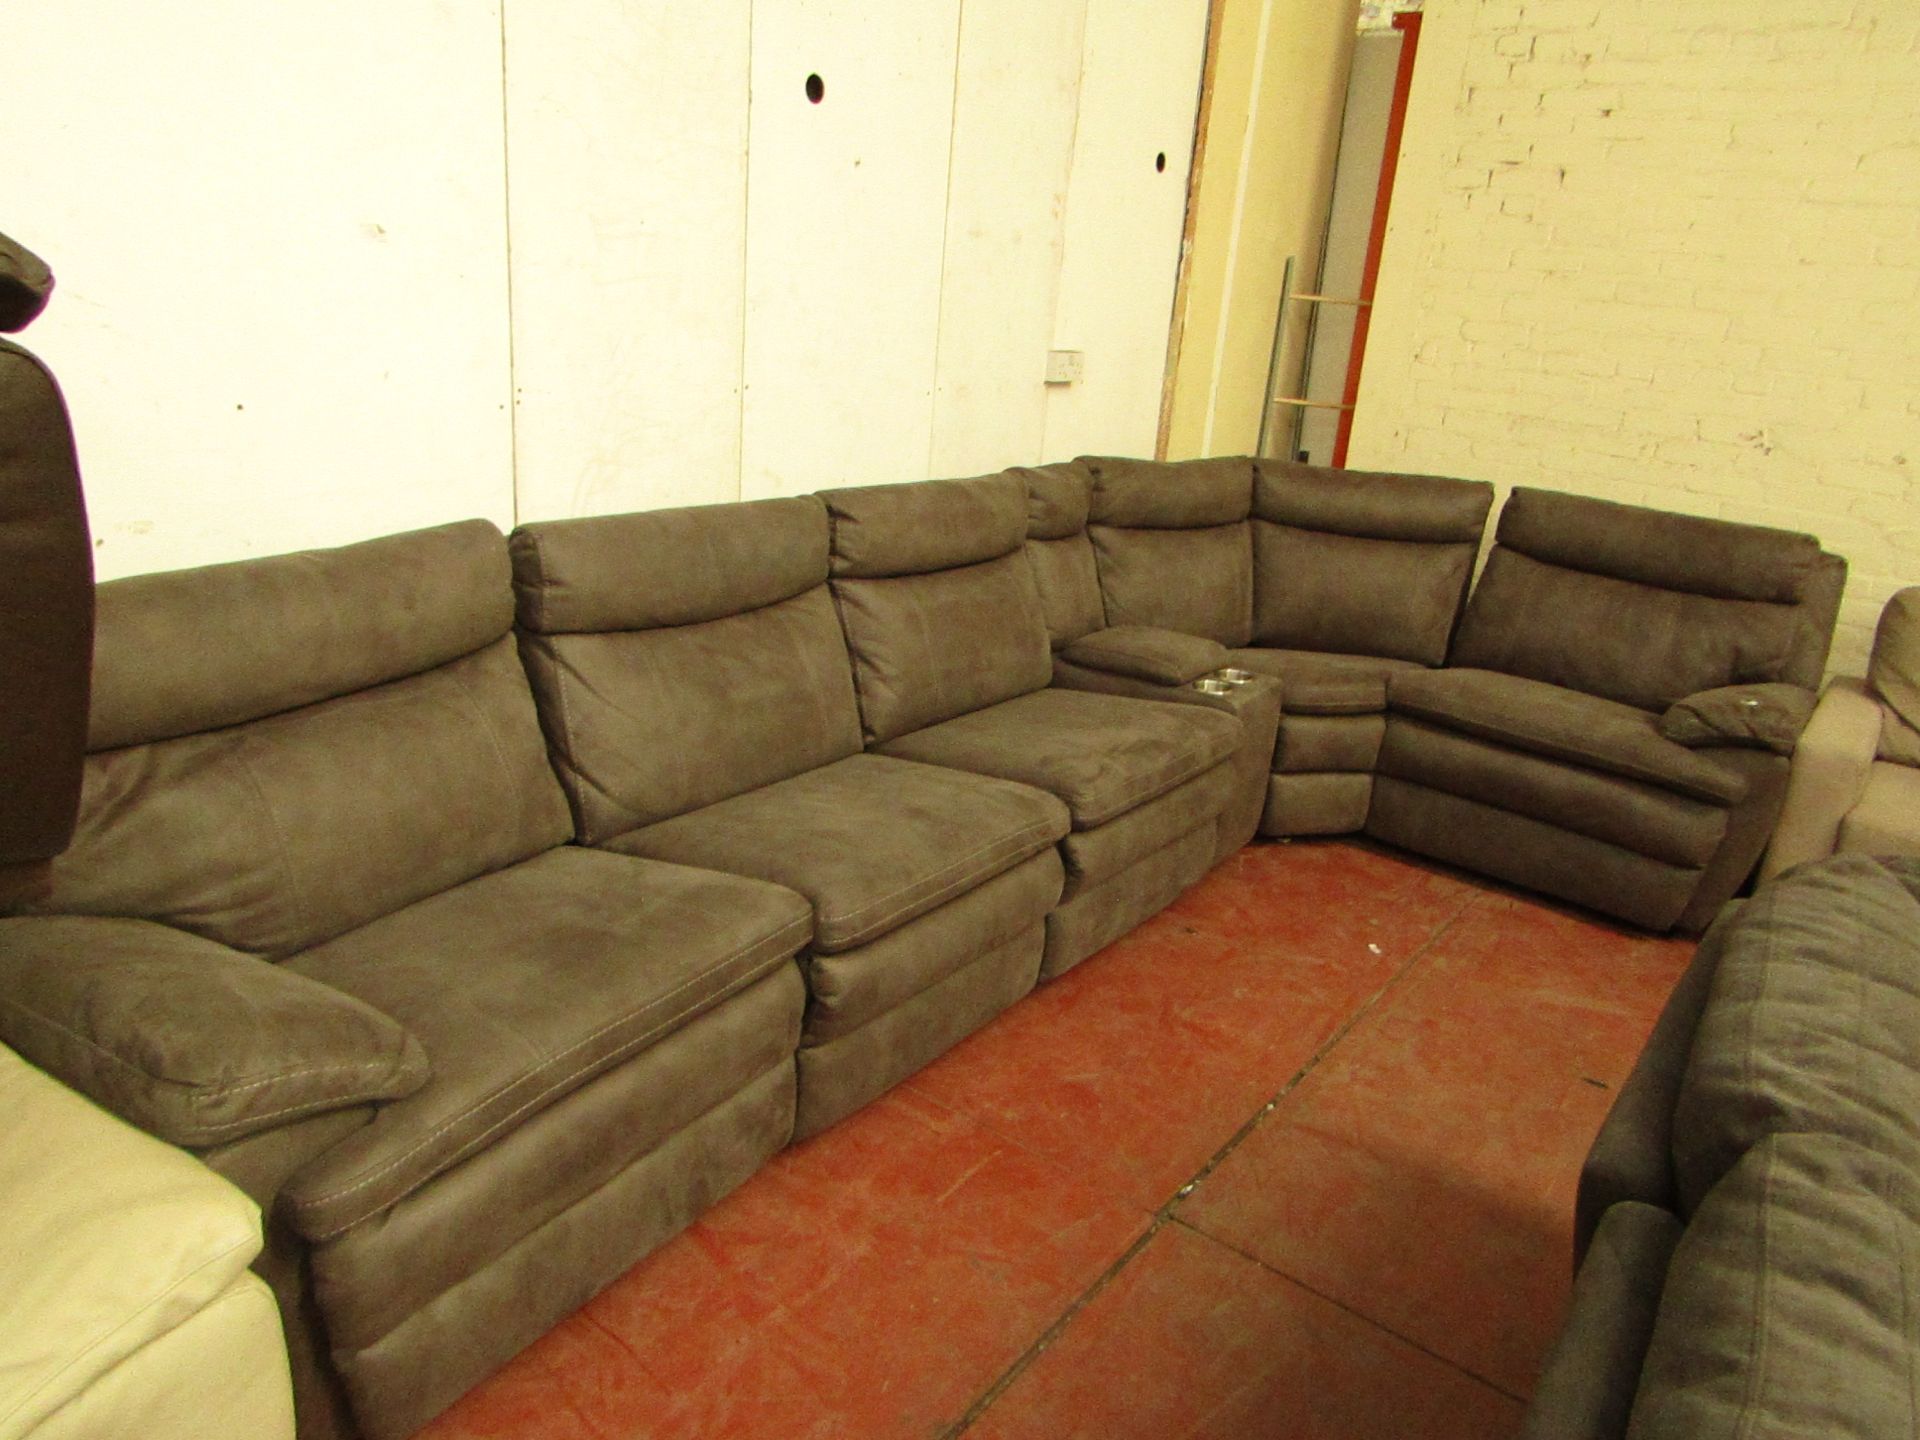 Kuka 6 piece section cordner sofa with 3 reclining parts and a storage srm rest piece with cup